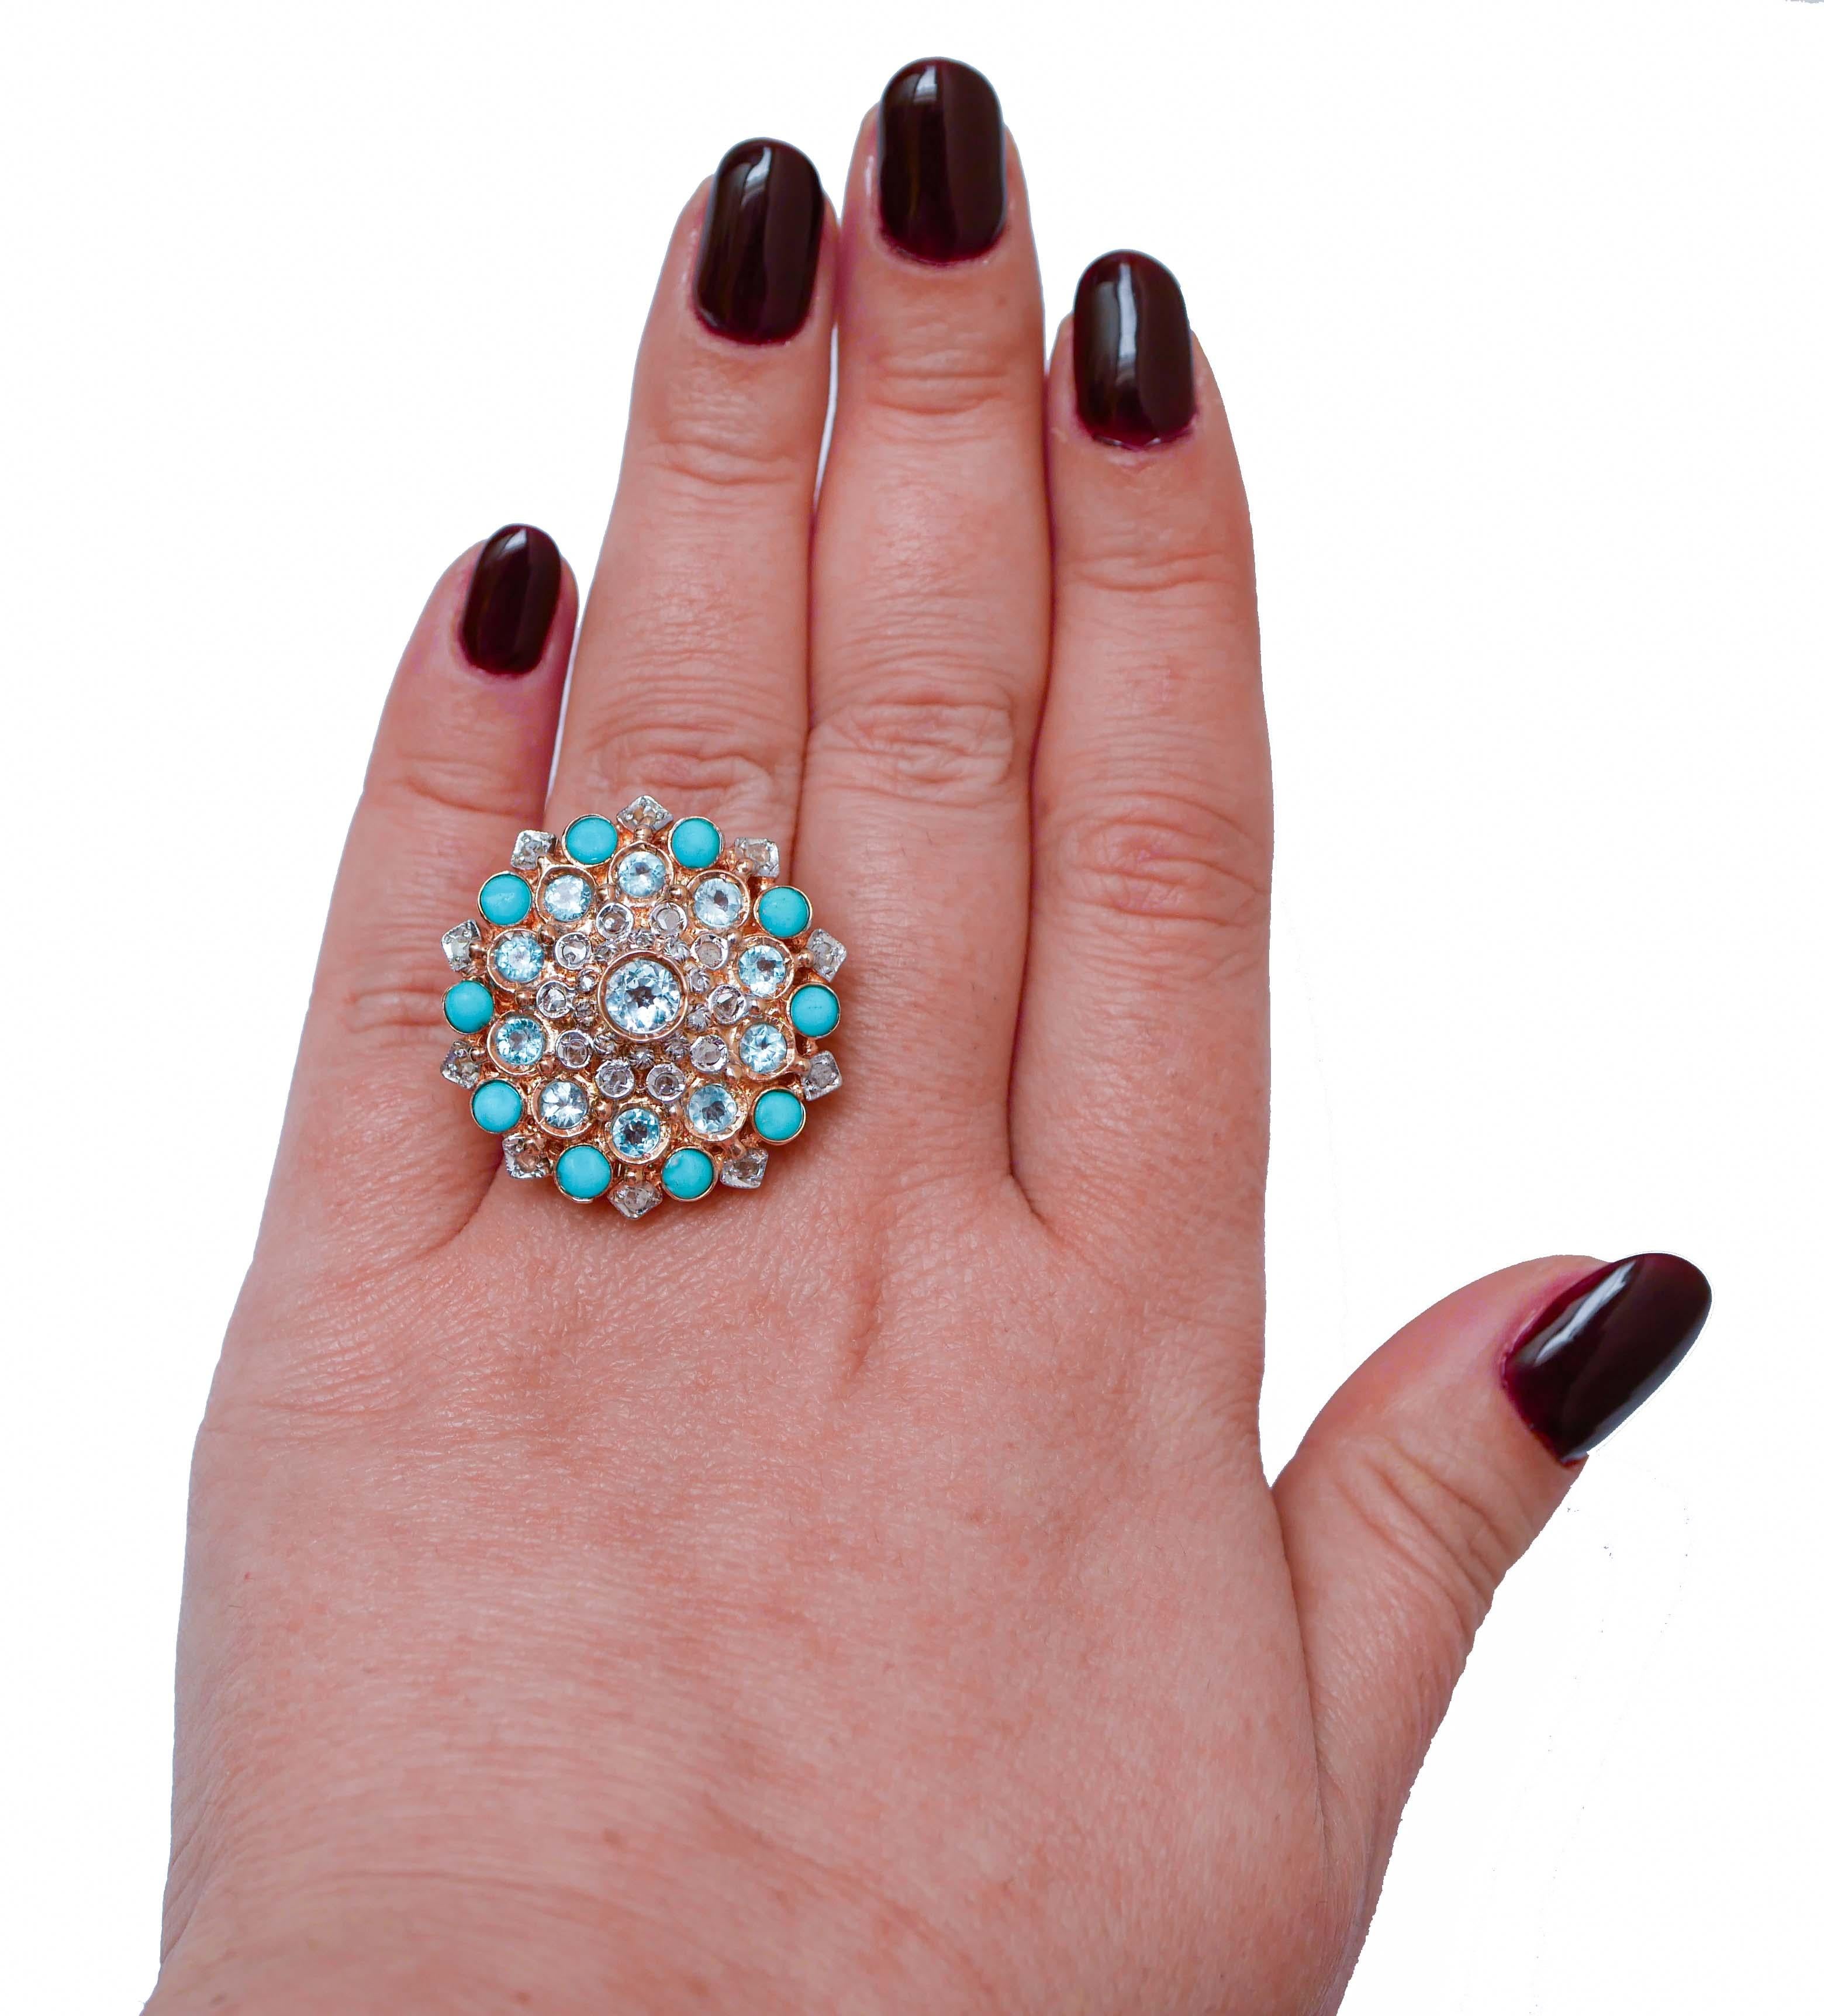 Mixed Cut Turquoise, Aquamarine Colour Topazs, Diamonds, Rose Gold and Silver Ring.